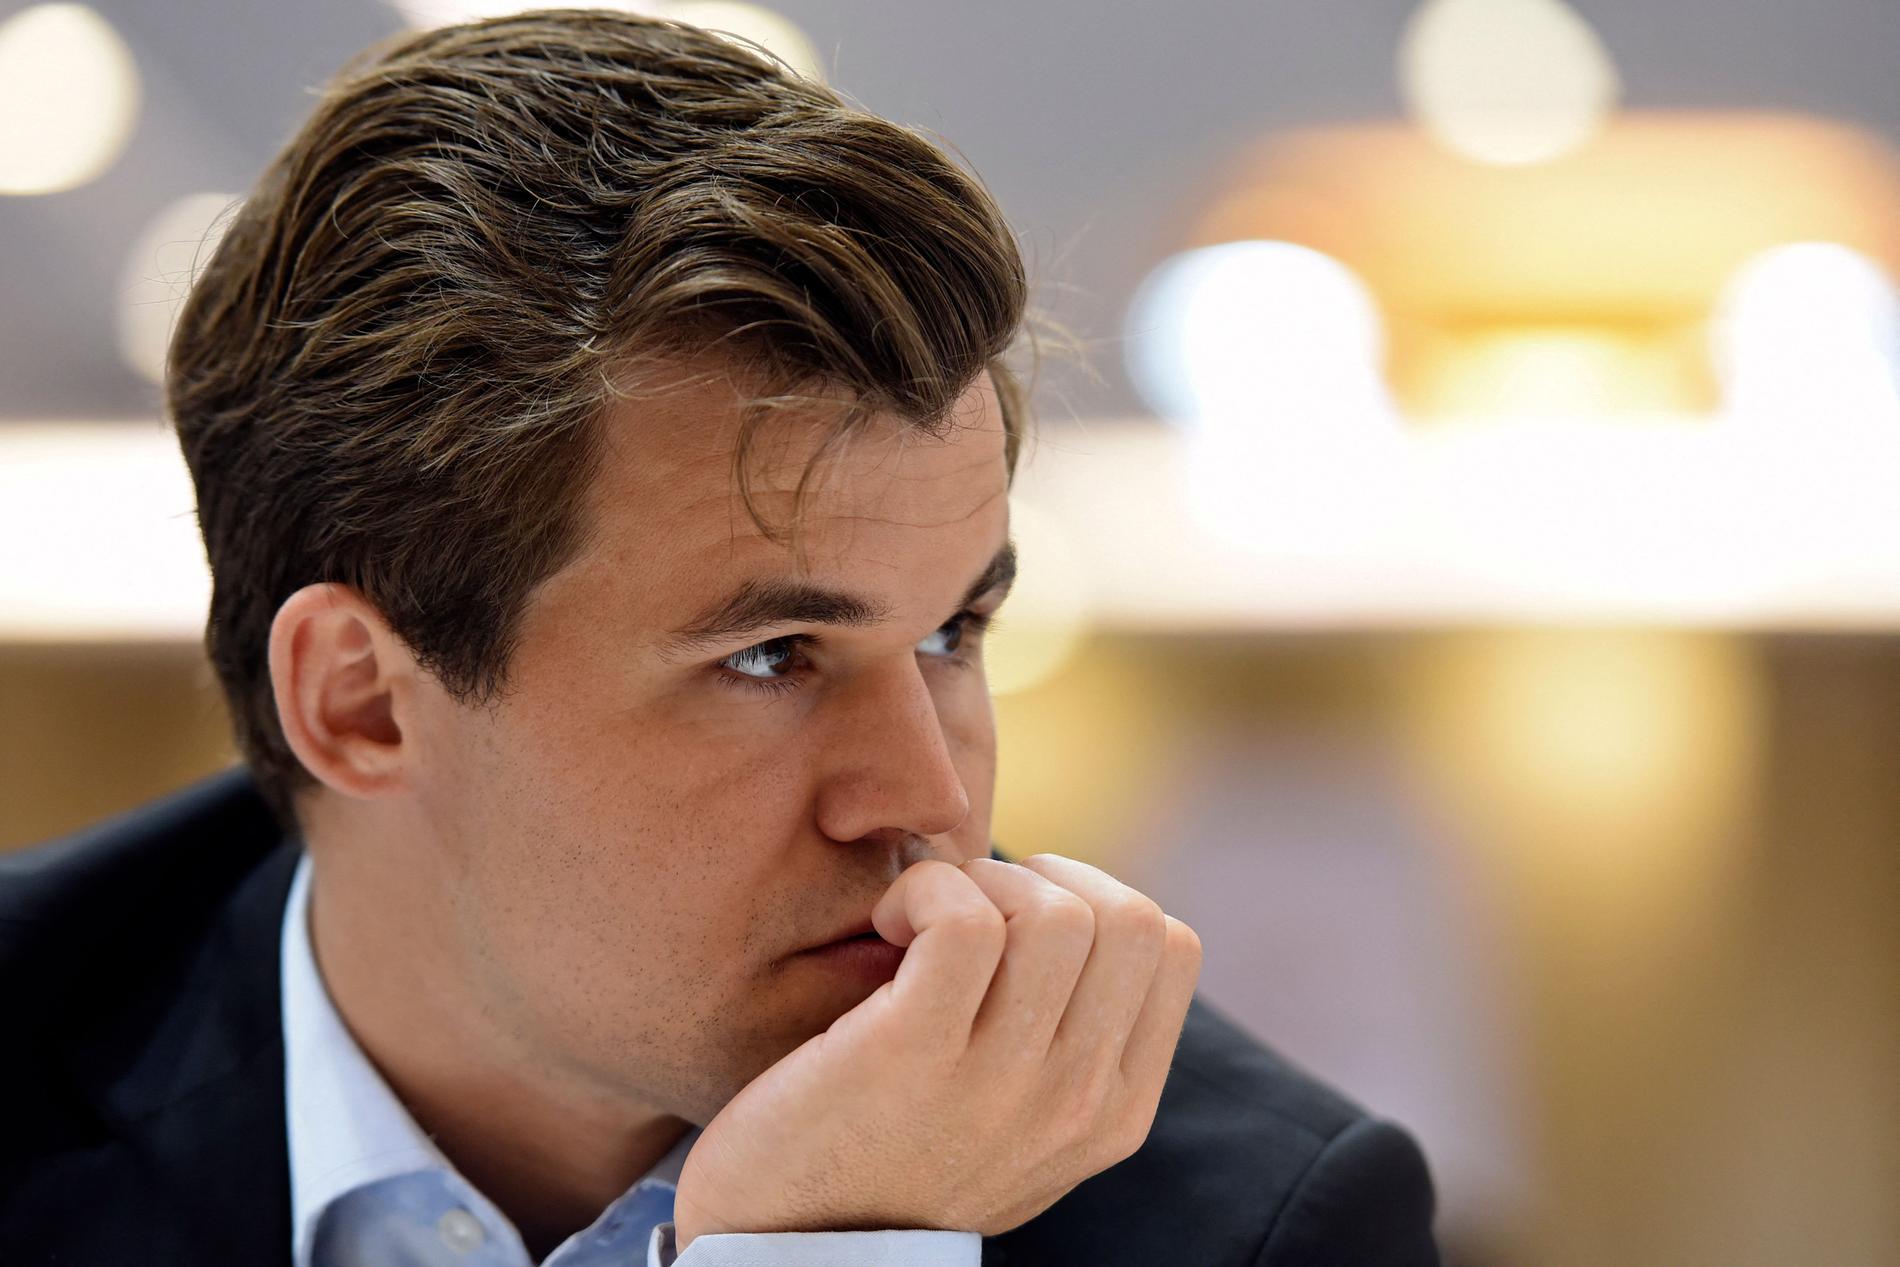 Carlsen qualified for the semi-finals - Neiman exit - VG